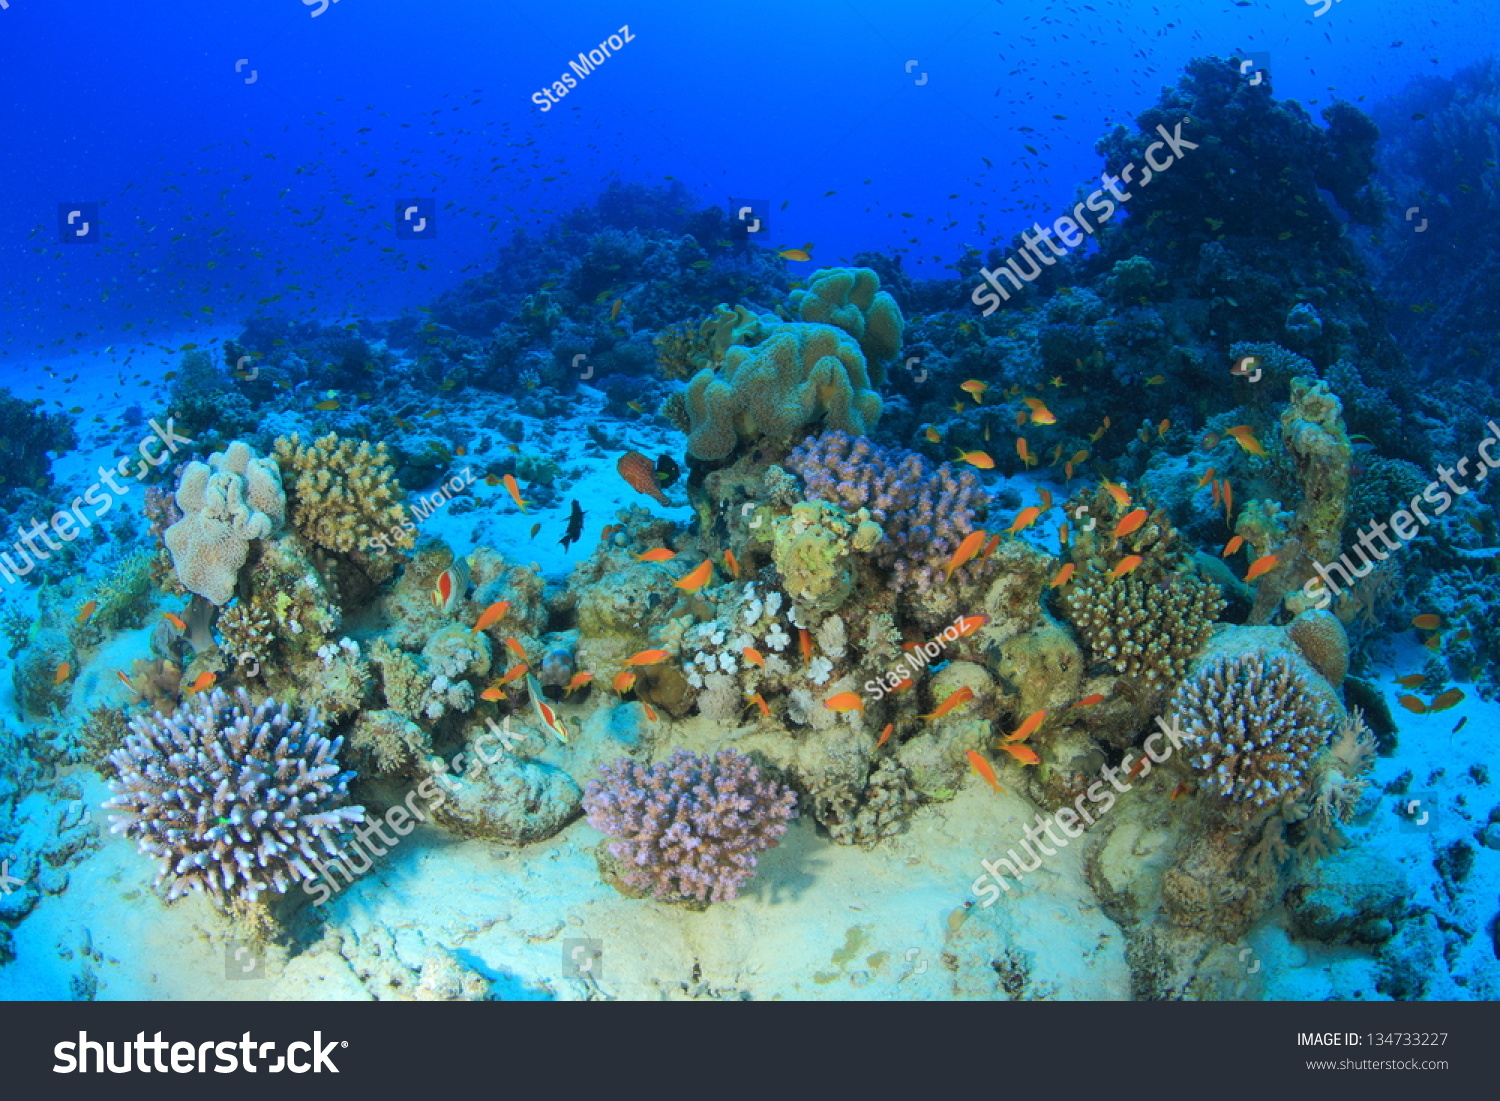 Marine Life In The Red Sea Stock Photo 134733227 : Shutterstock